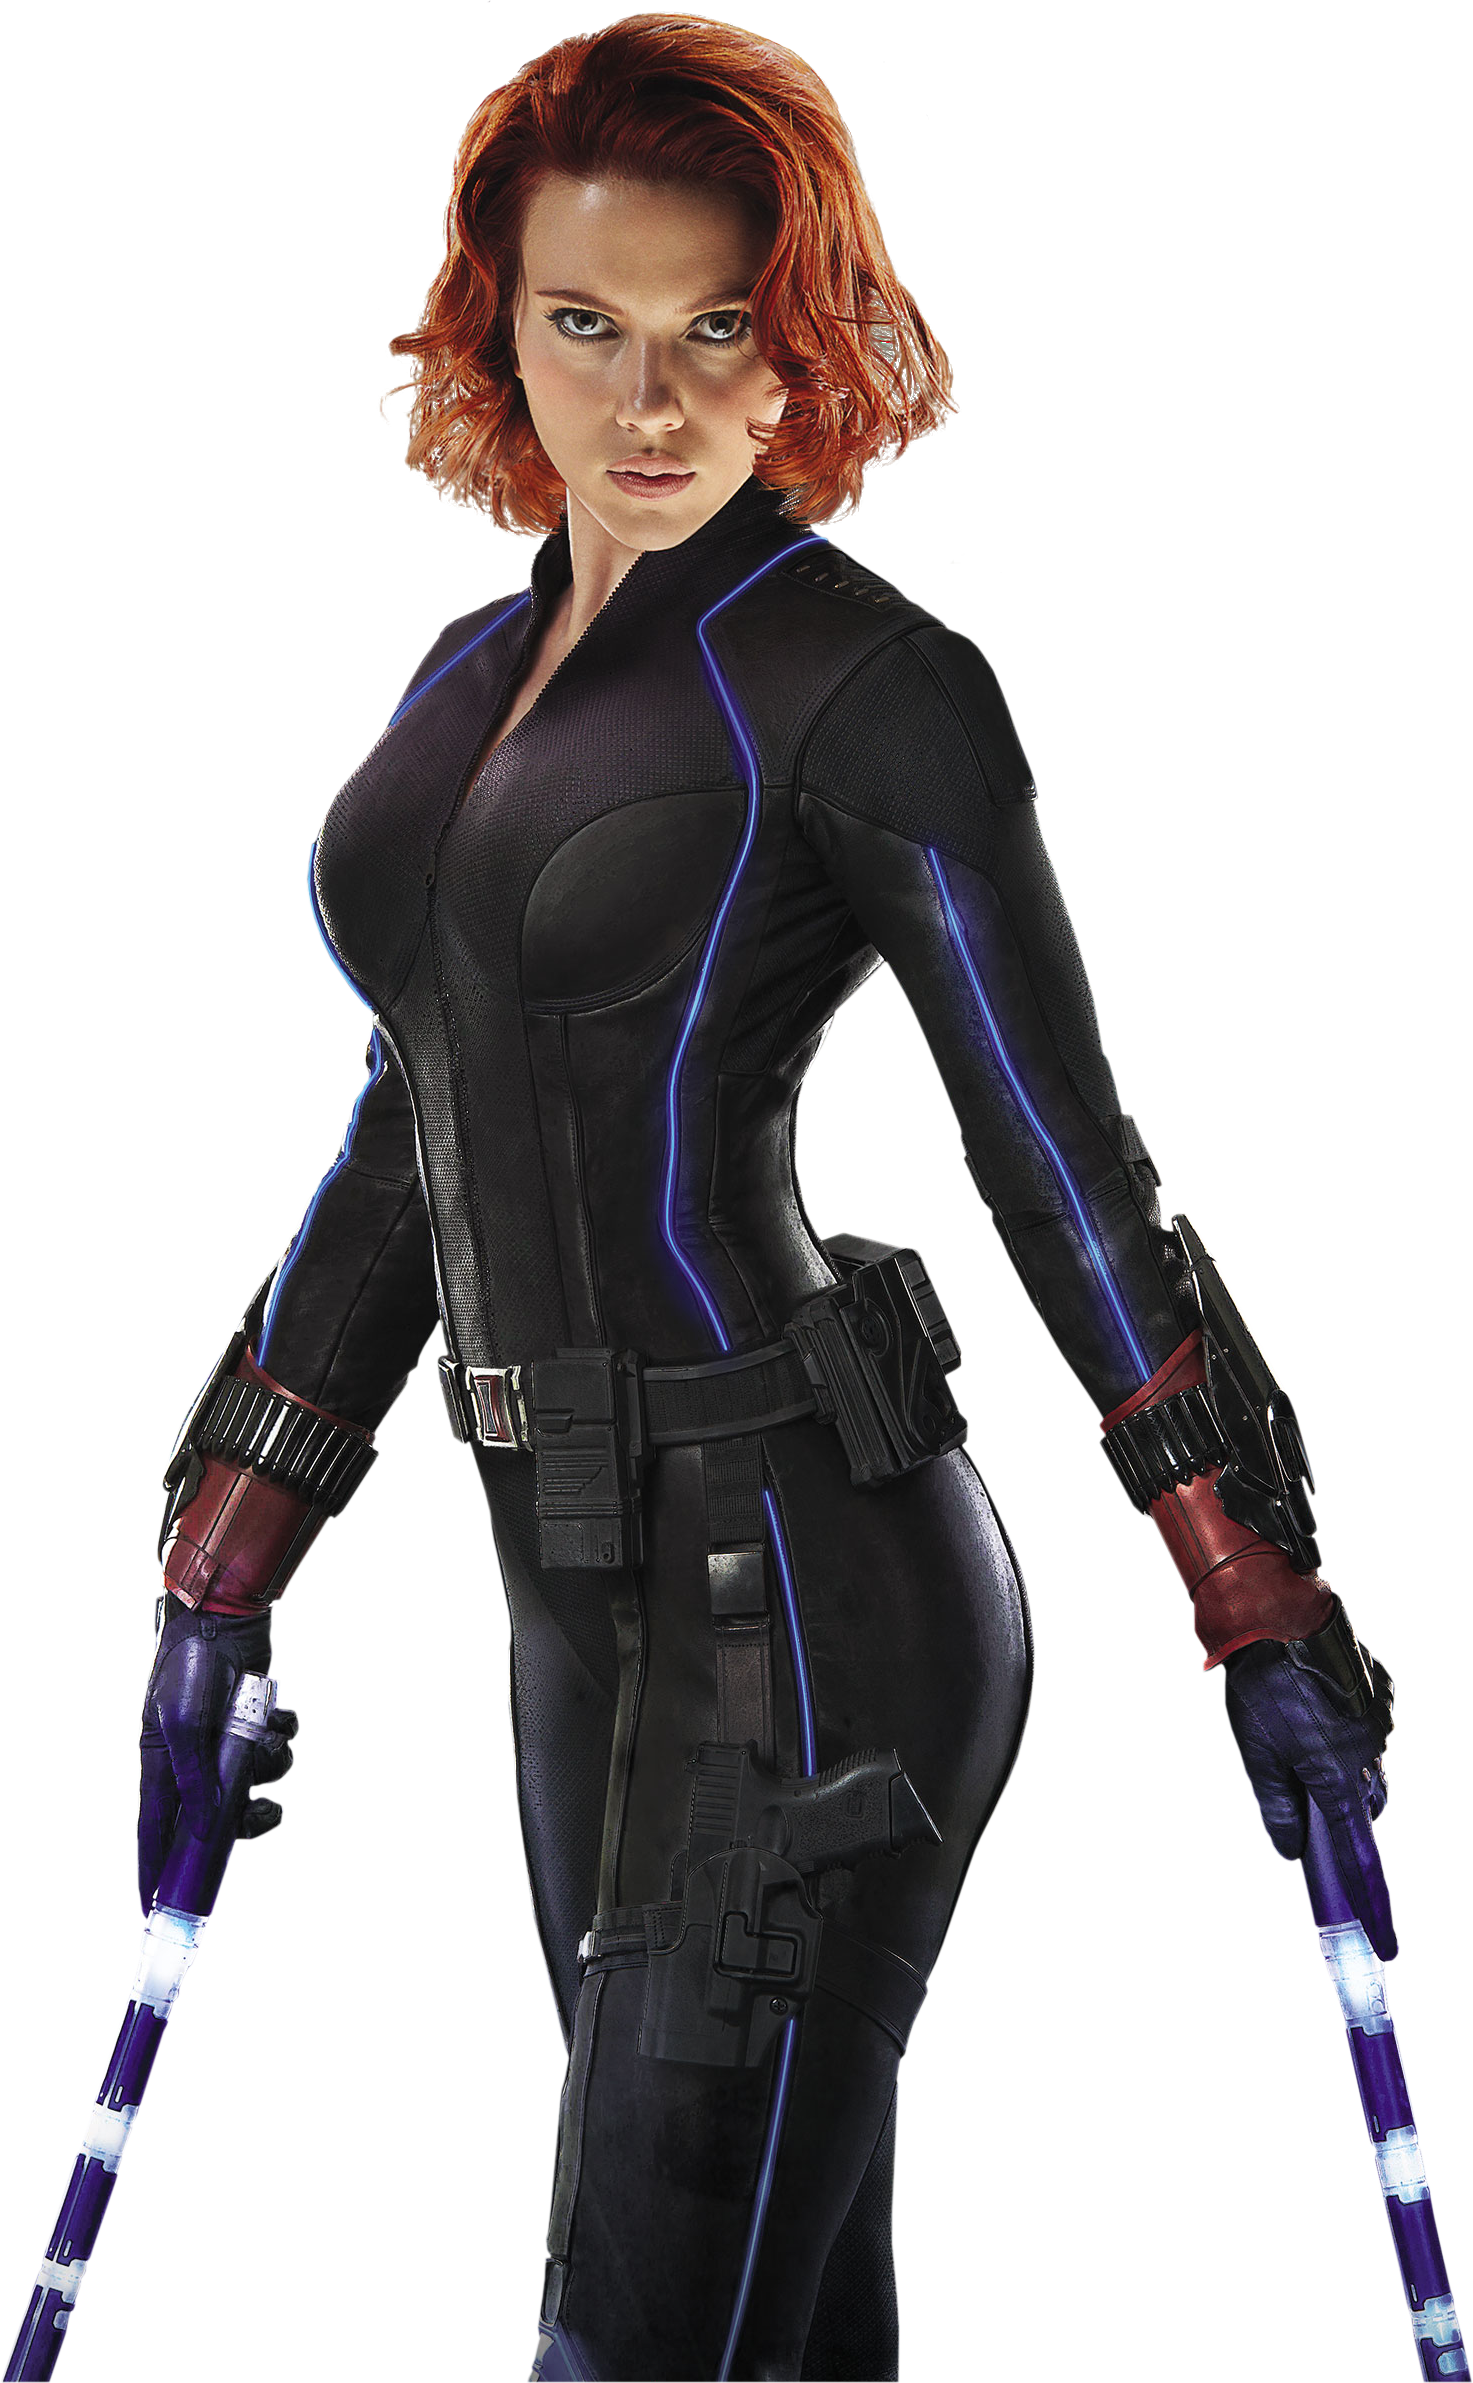 Black Widow Avengers Age of Ultron wallpapers (98 Wallpapers